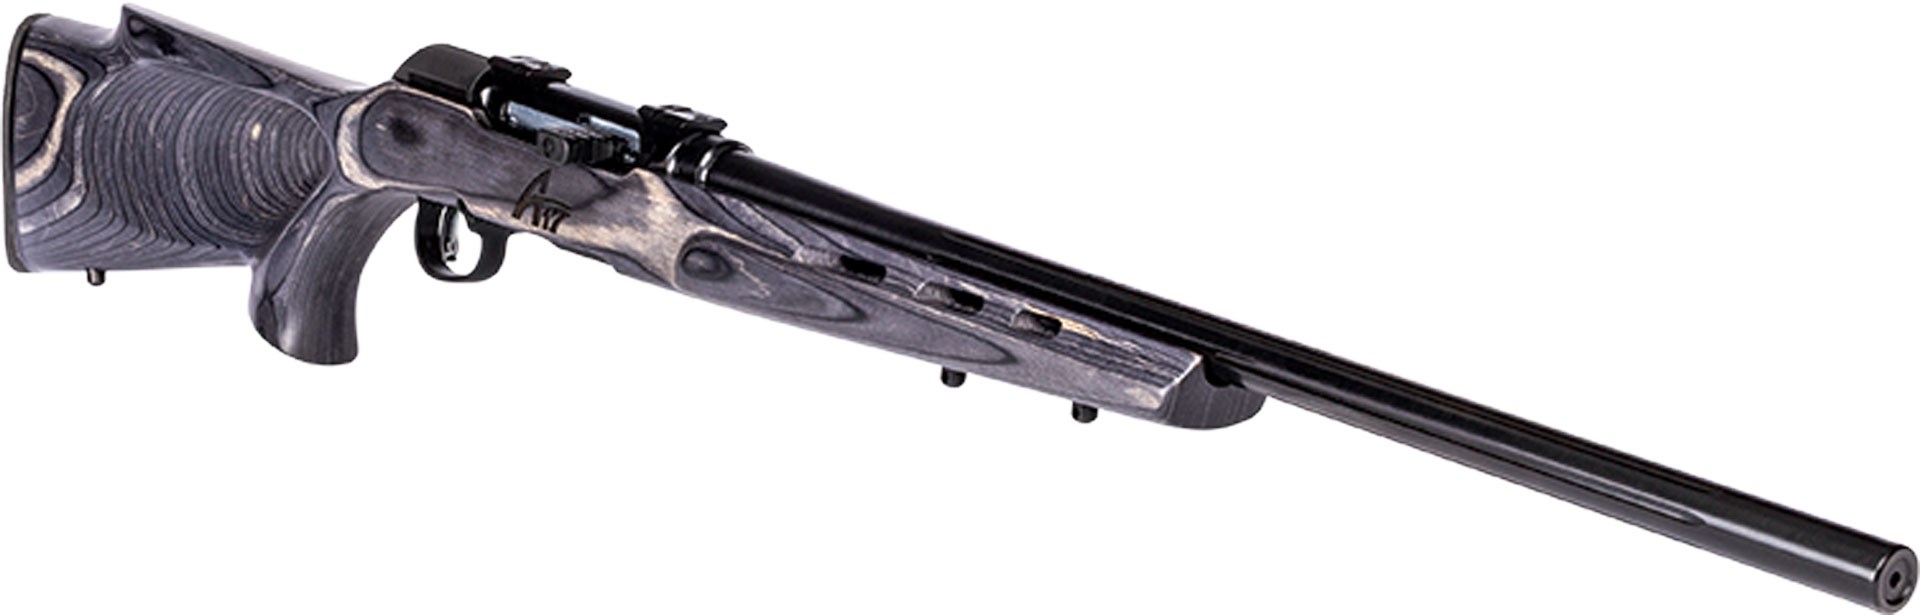 Savage Arms Adds .17 WSM to A Series Rifle Line